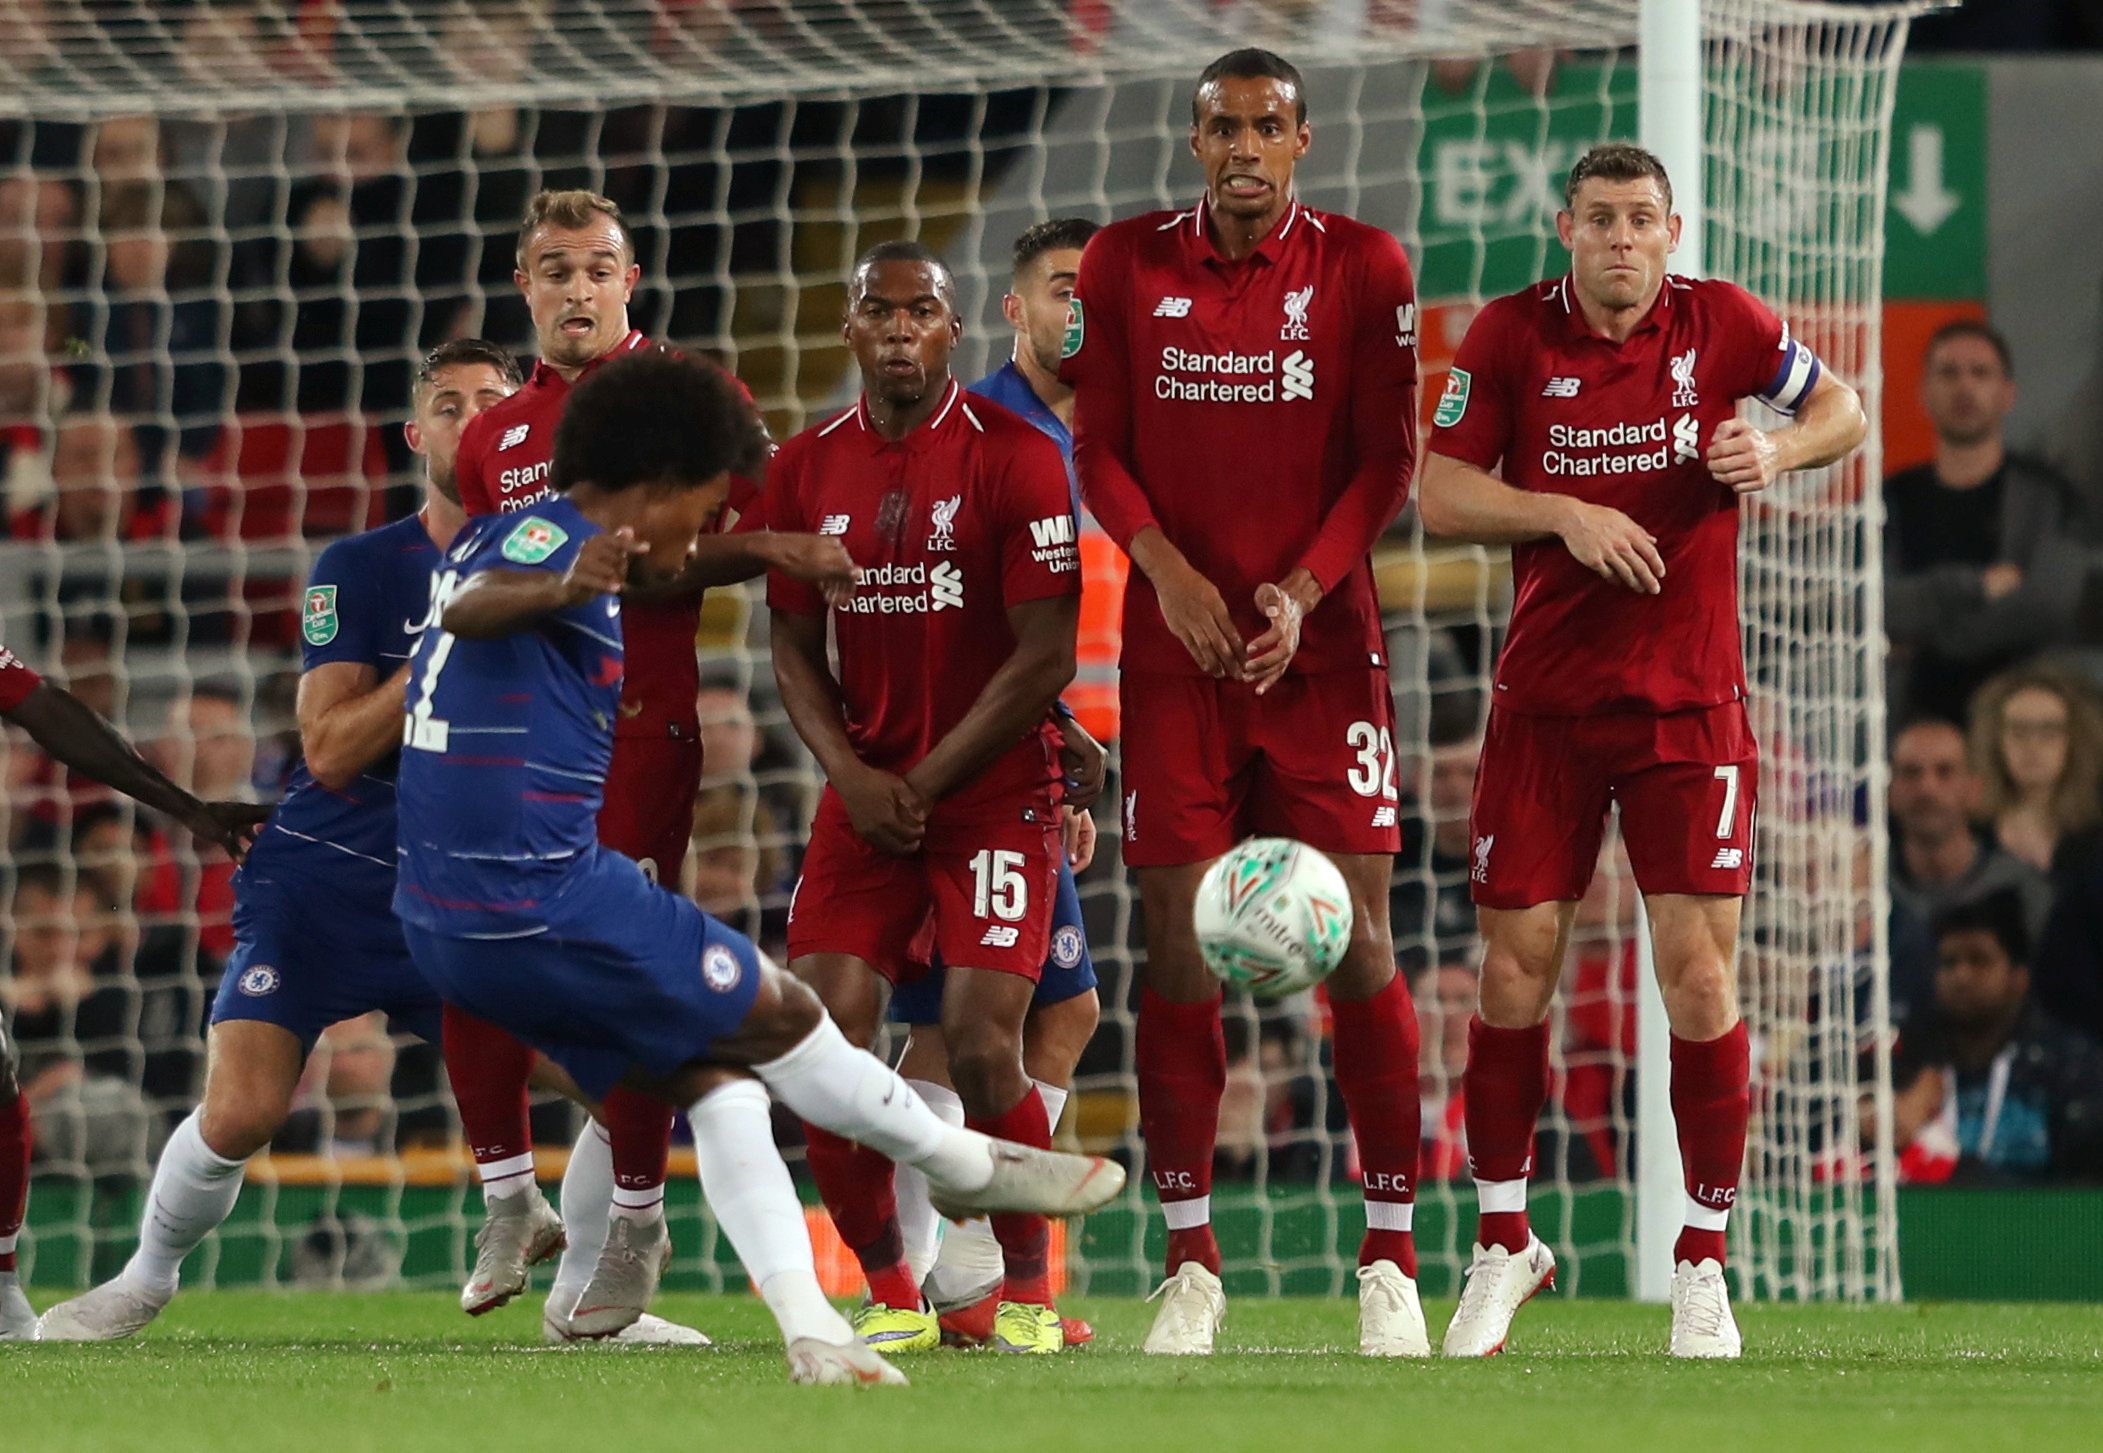 Soccer Football - Carabao Cup - Third Round - Liverpool v Chelsea - Anfield, Liverpool, Britain - September 26, 2018  Liverpool's Xherdan Shaqiri, Daniel Sturridge, Joel Matip and James Milner in the wall to defend a free kick from Chelsea's Willian   Action Images via Reuters/Lee Smith  EDITORIAL USE ONLY. No use with unauthorized audio, video, data, fixture lists, club/league logos or 